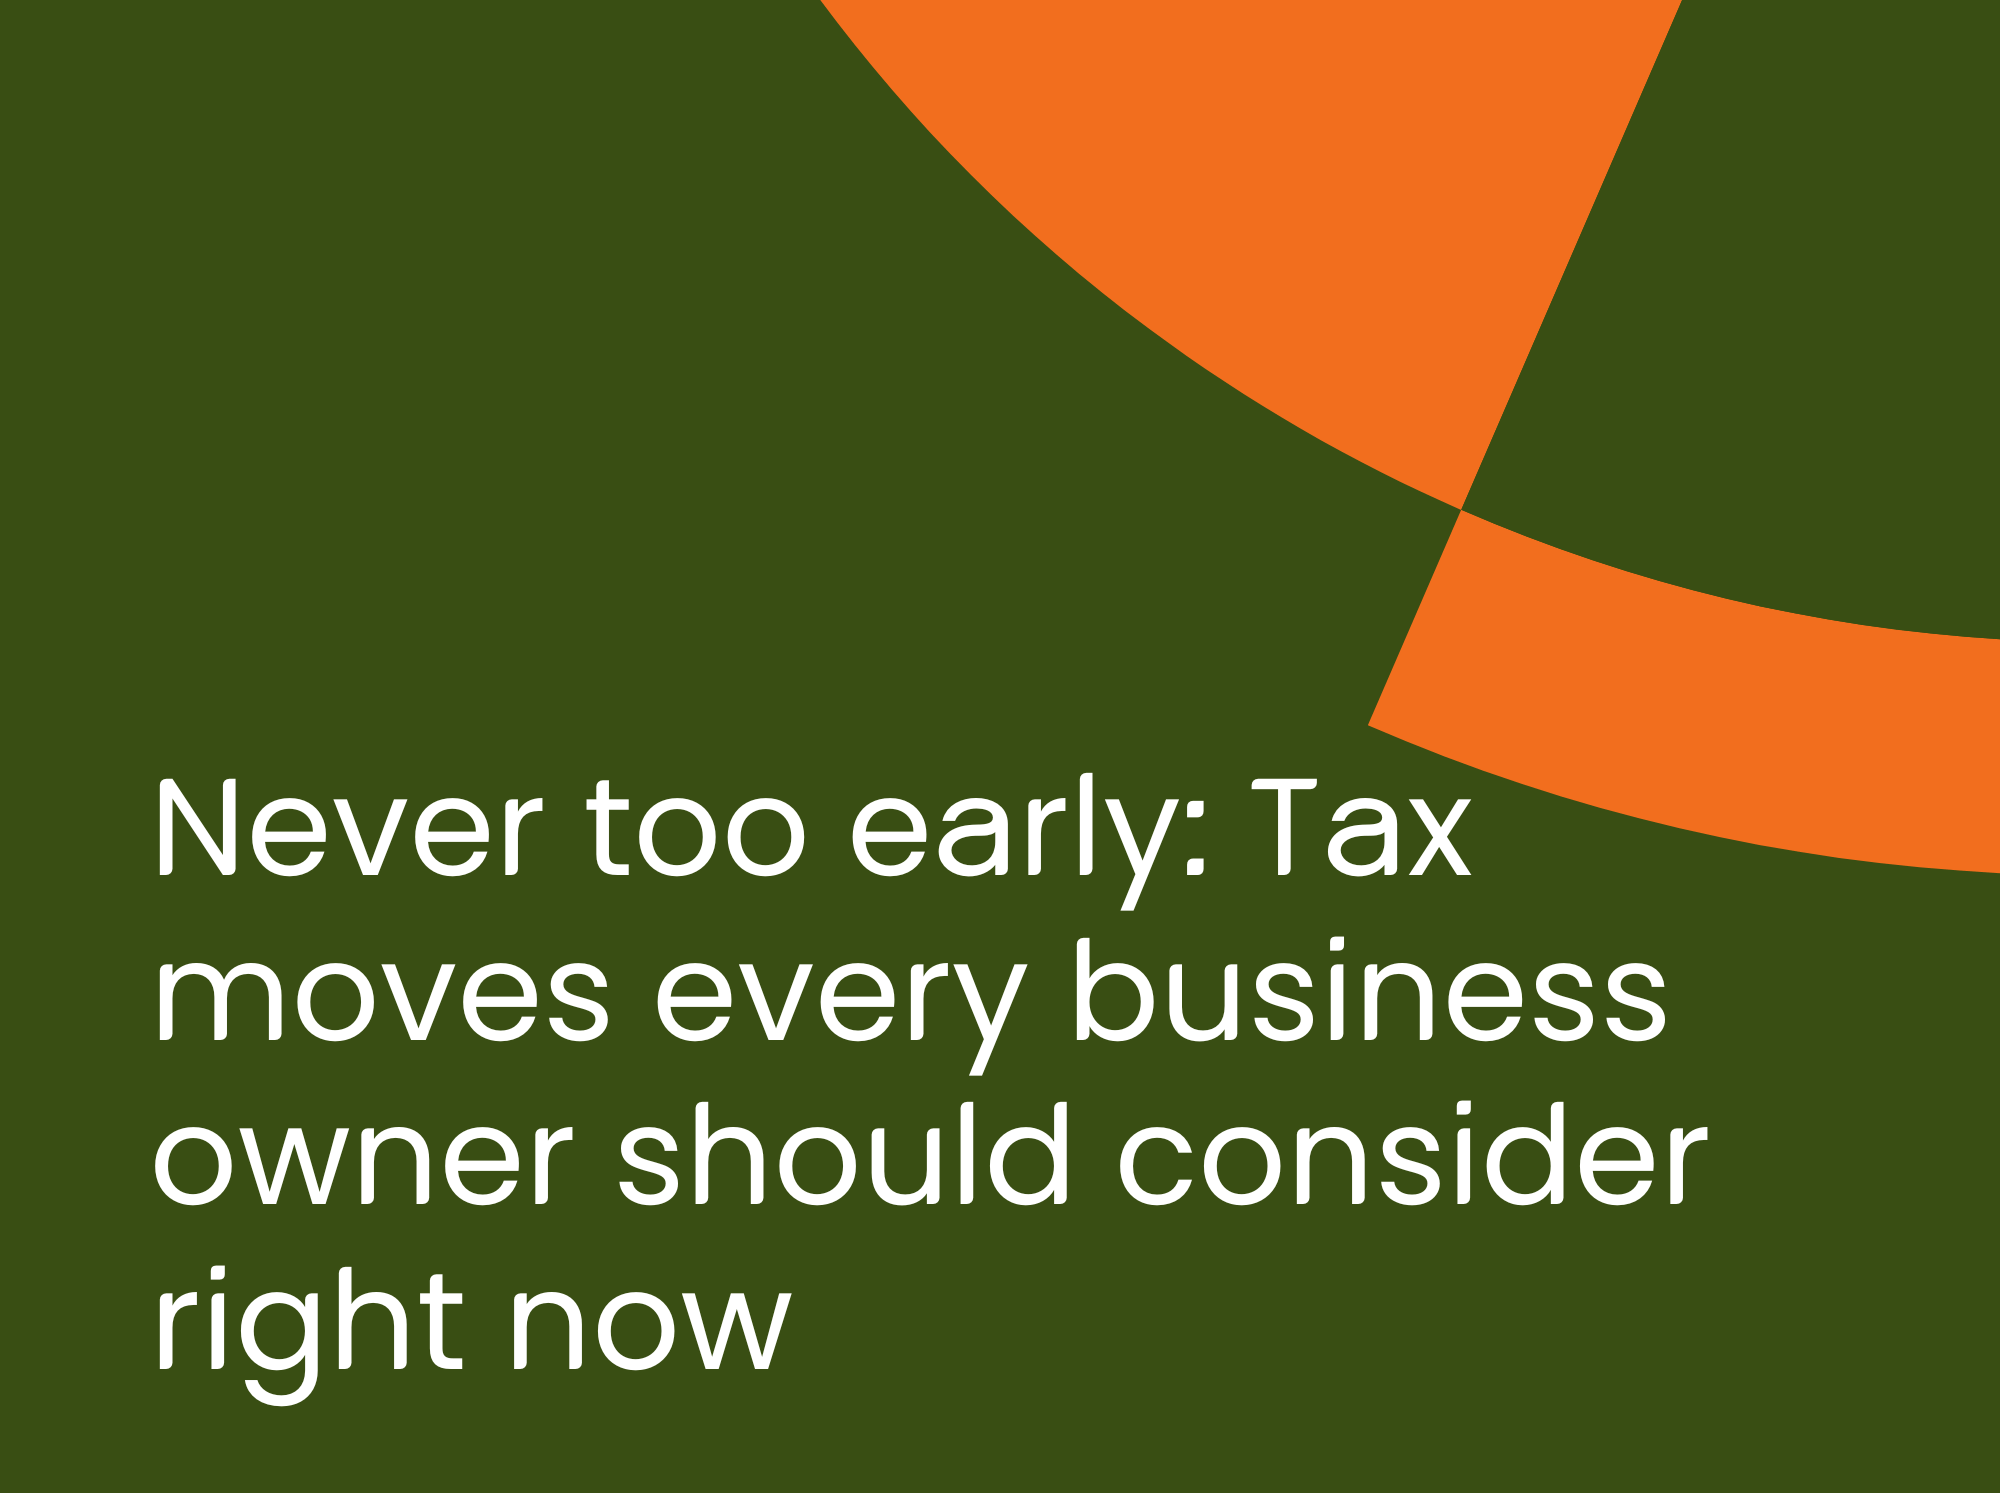 Never too early: Tax moves every business owner should consider right now